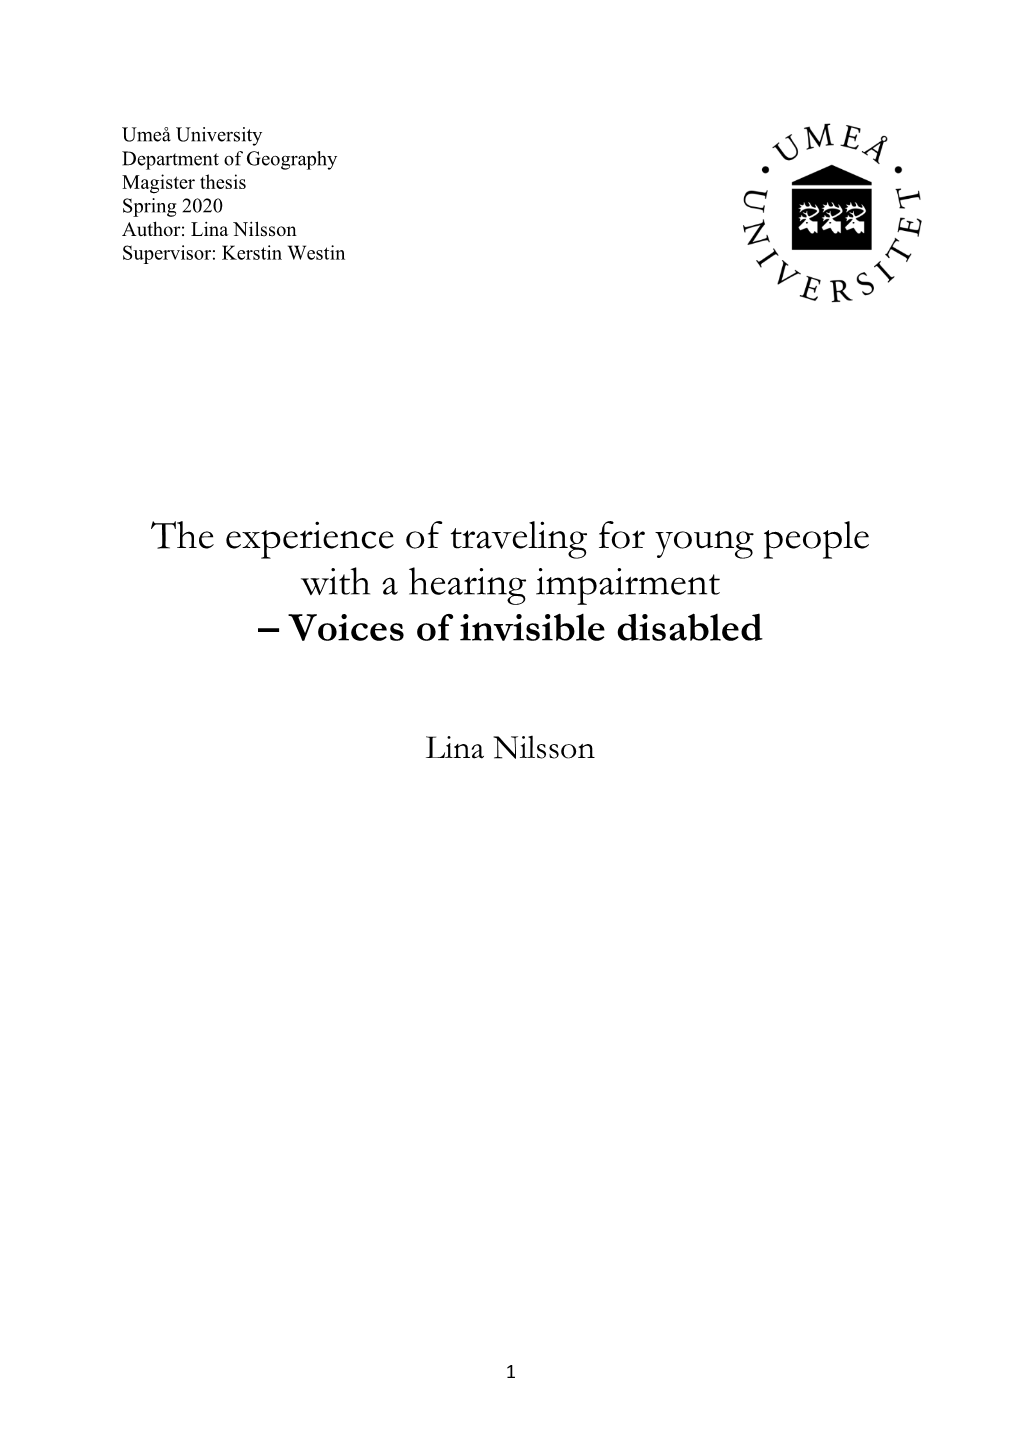 The Experience of Traveling for Young People with a Hearing Impairment – Voices of Invisible Disabled